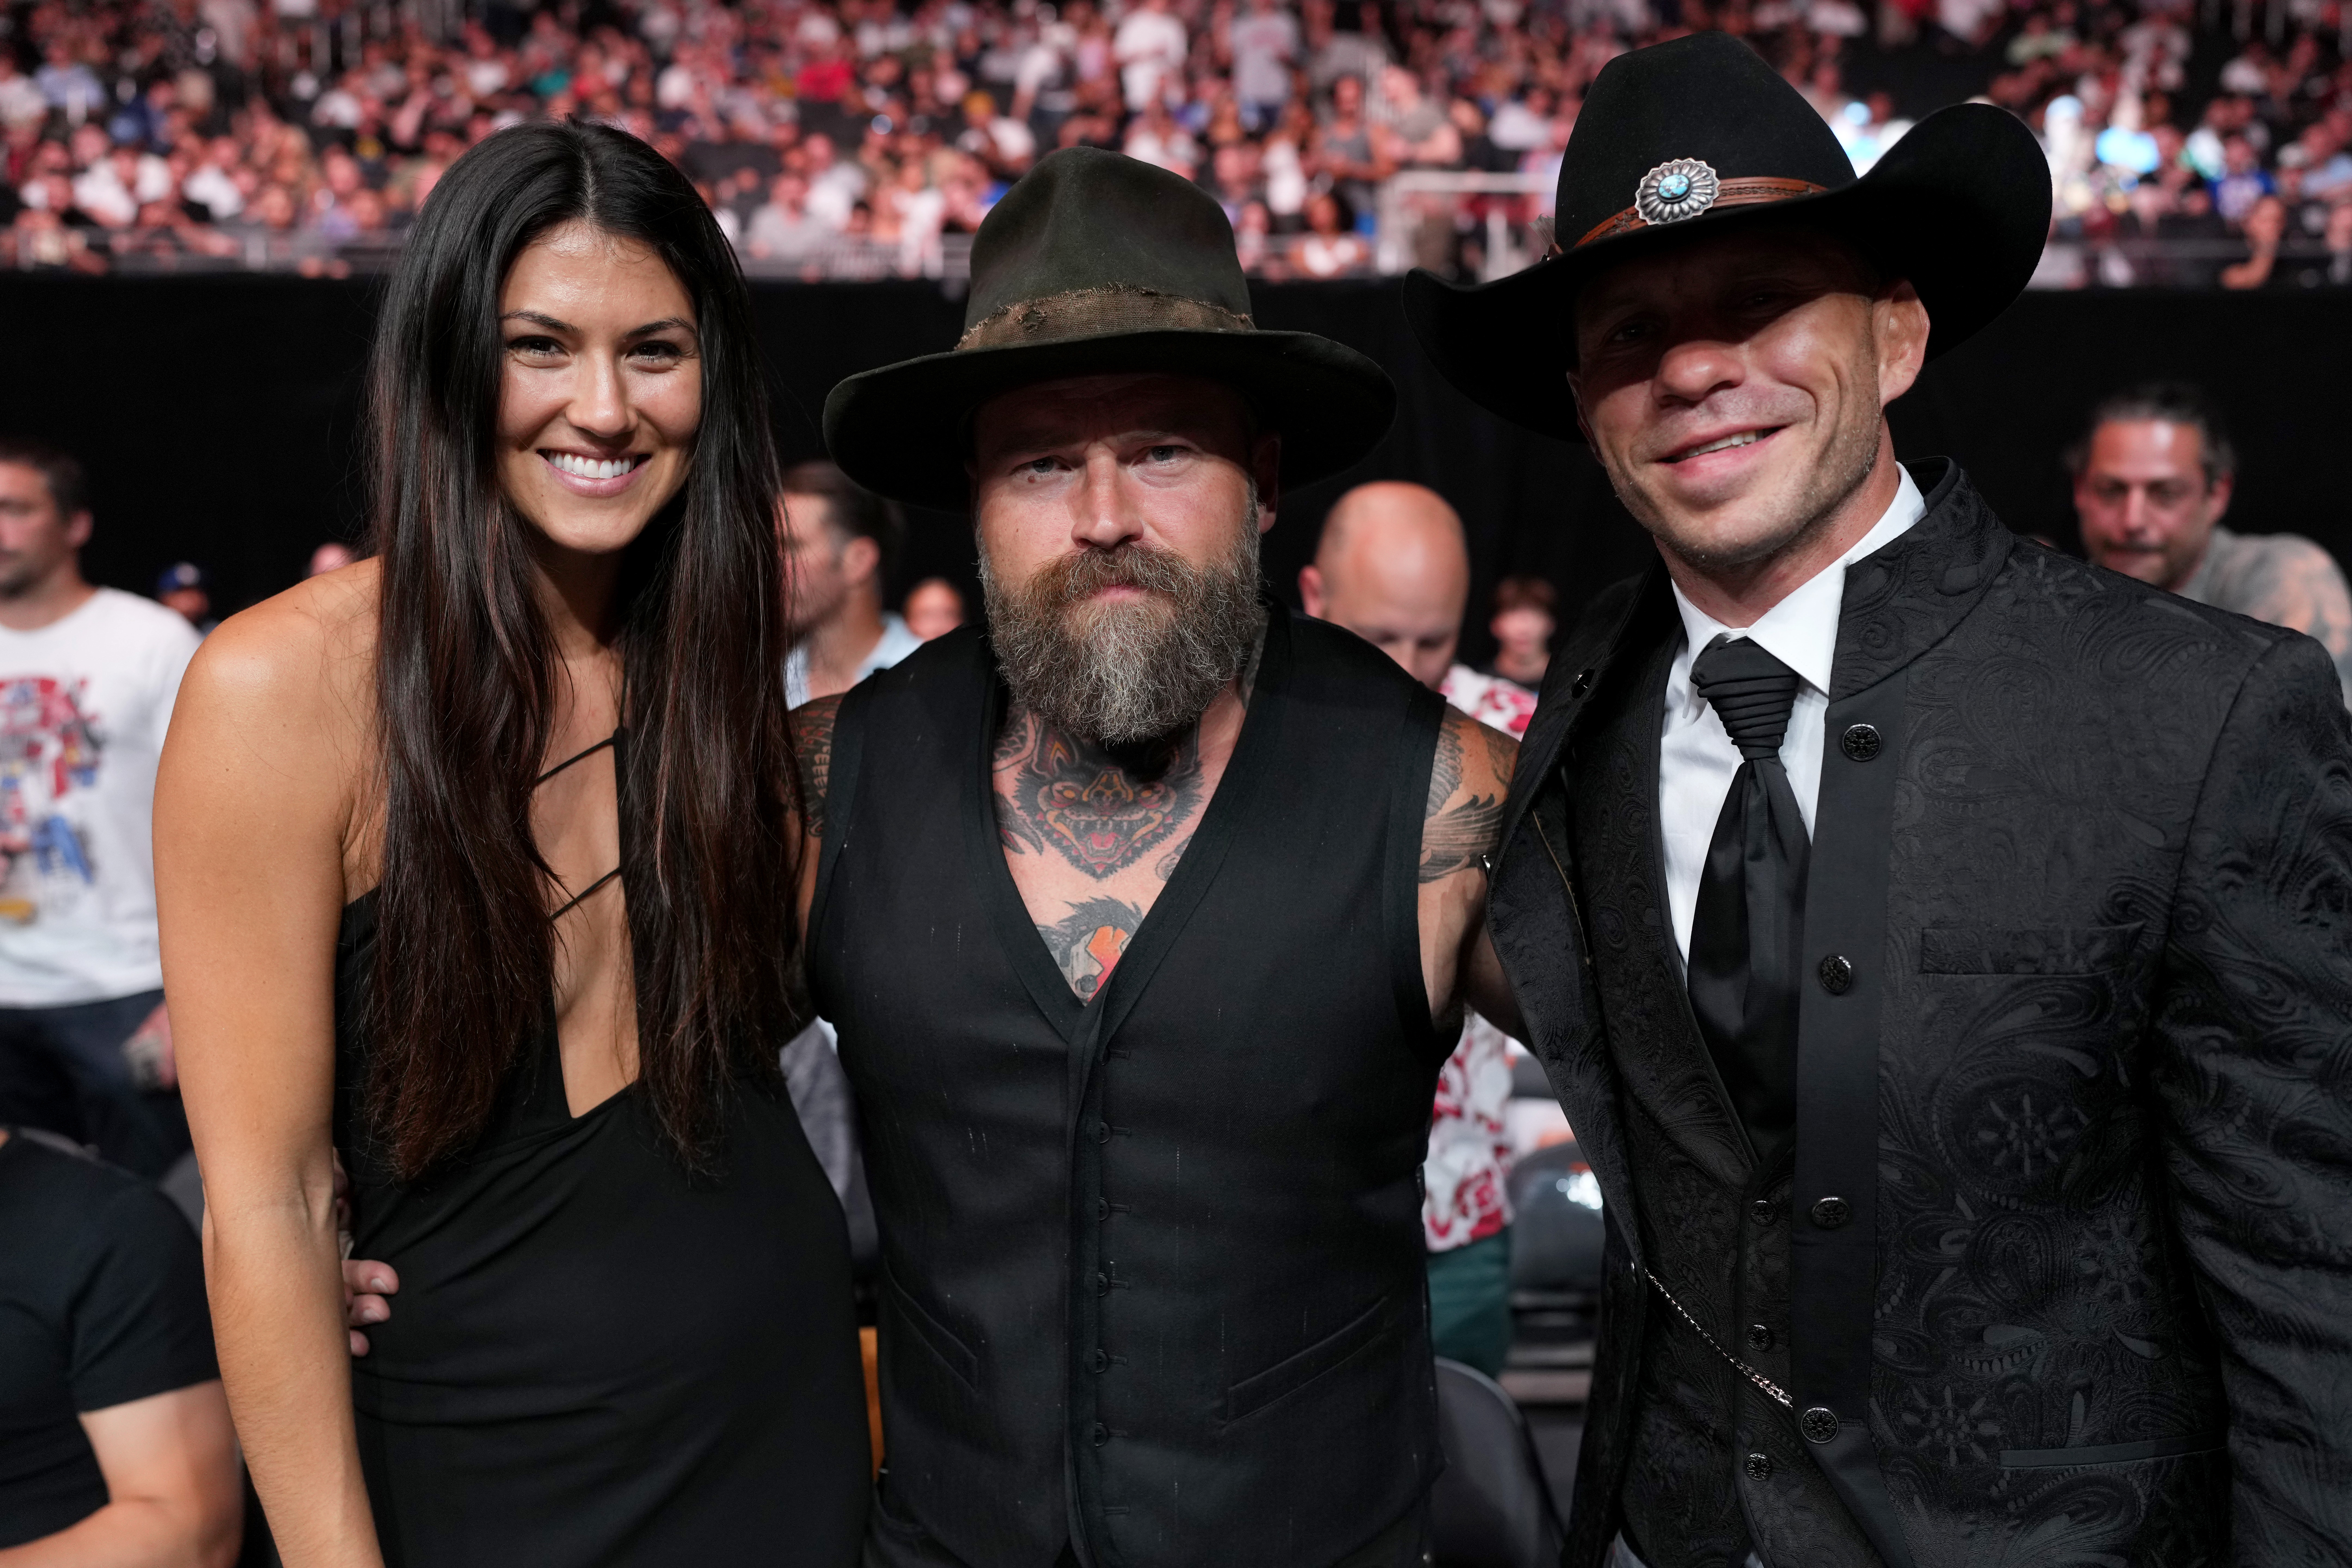 AUSTIN, TEXAS – JUNE 18: Recording artist Zac Brown (C) of the Zac Brown Band is seen in attendance with a guest and Donald “Cowboy” Cerrone (R) during the UFC Fight Night event at Moody Center on June 18, 2022 in Austin, Texas. (Photo by Cooper Neill/Zuffa LLC)